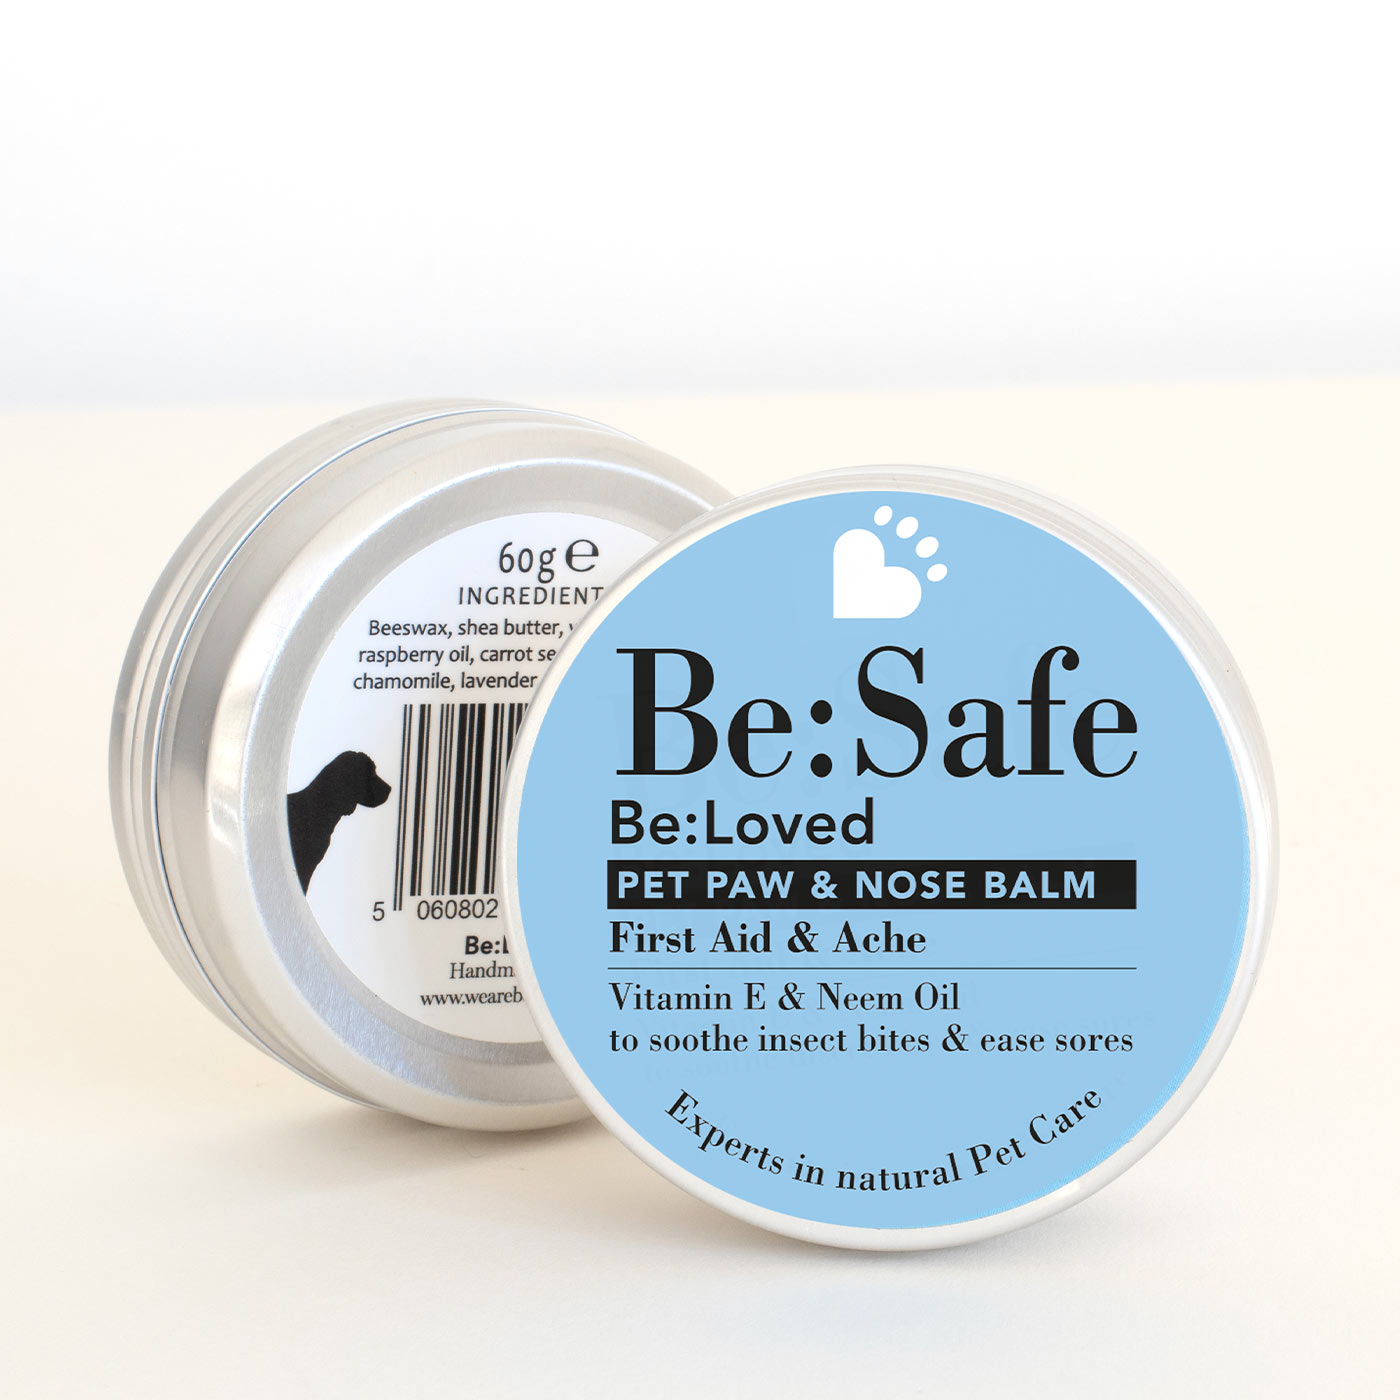 Be:Safe First Aid Nose & Paw Balm